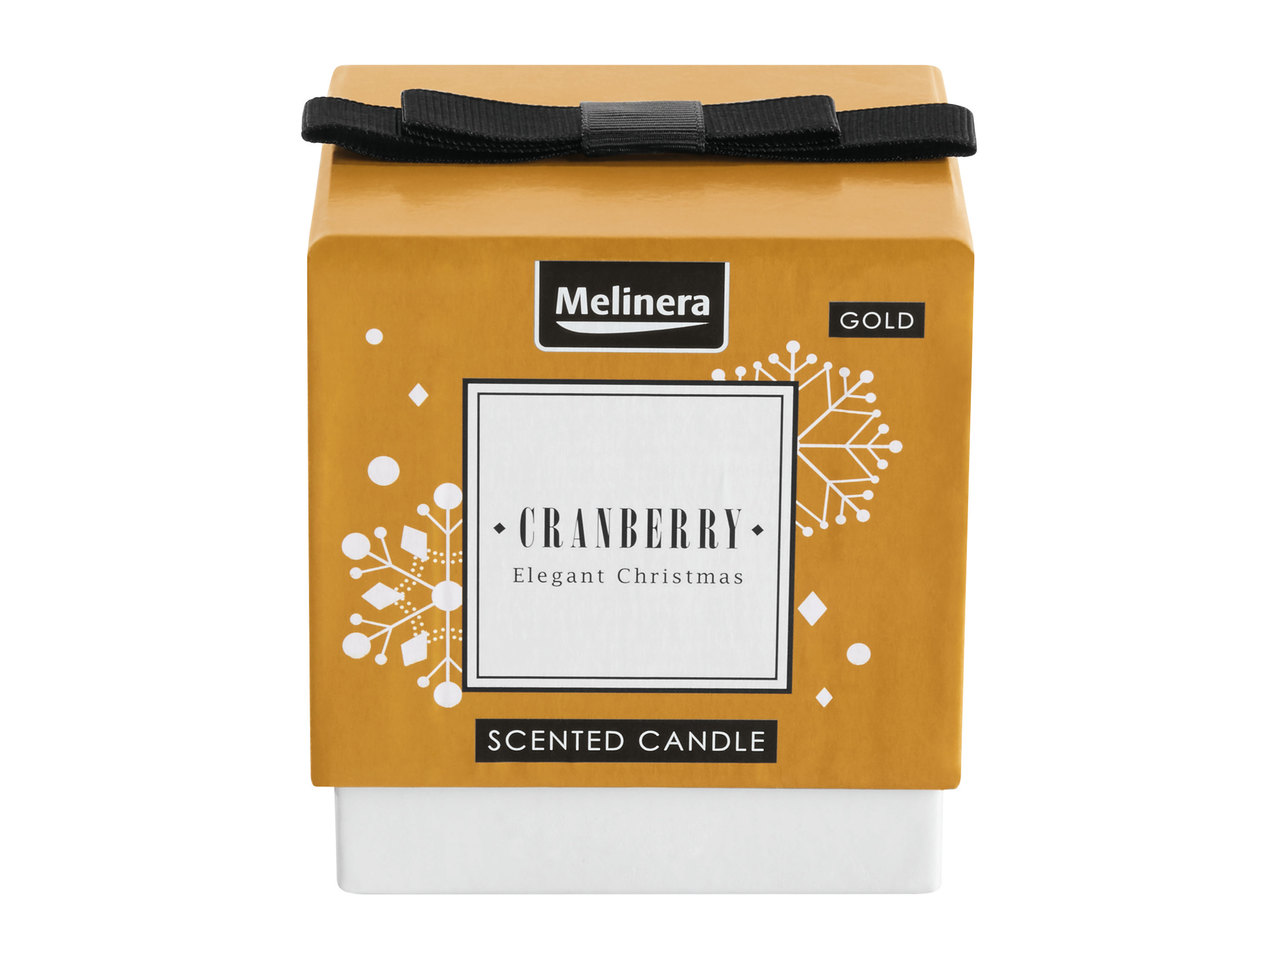 Melinera Large Scented Candle or Scented Candle Set1